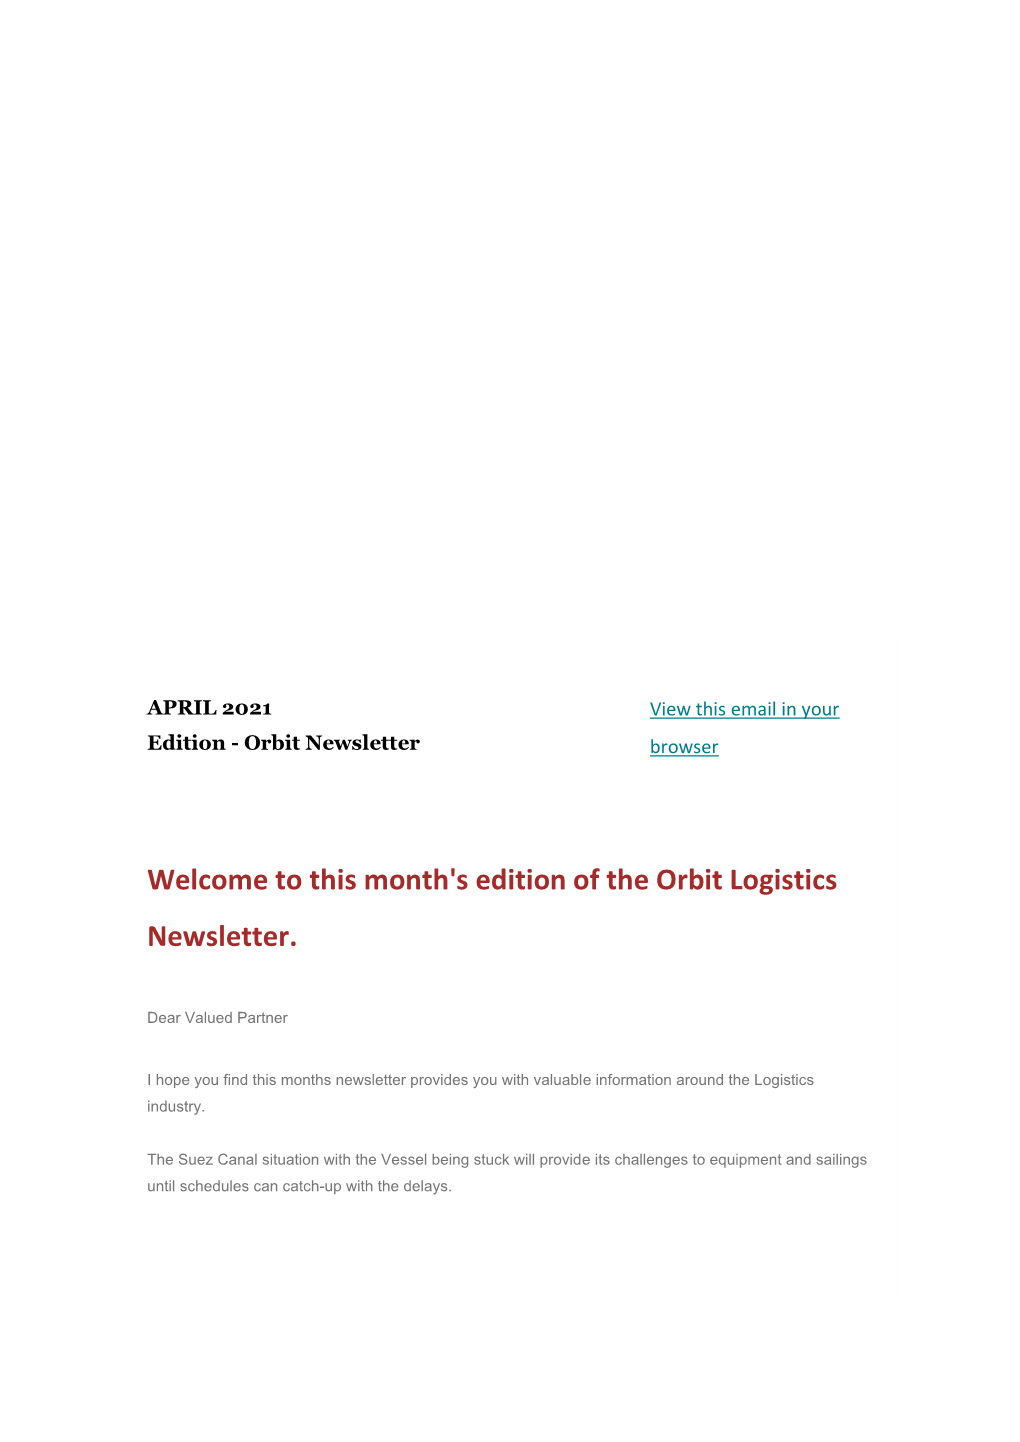 Welcome to This Month's Edition of the Orbit Logistics Newsletter